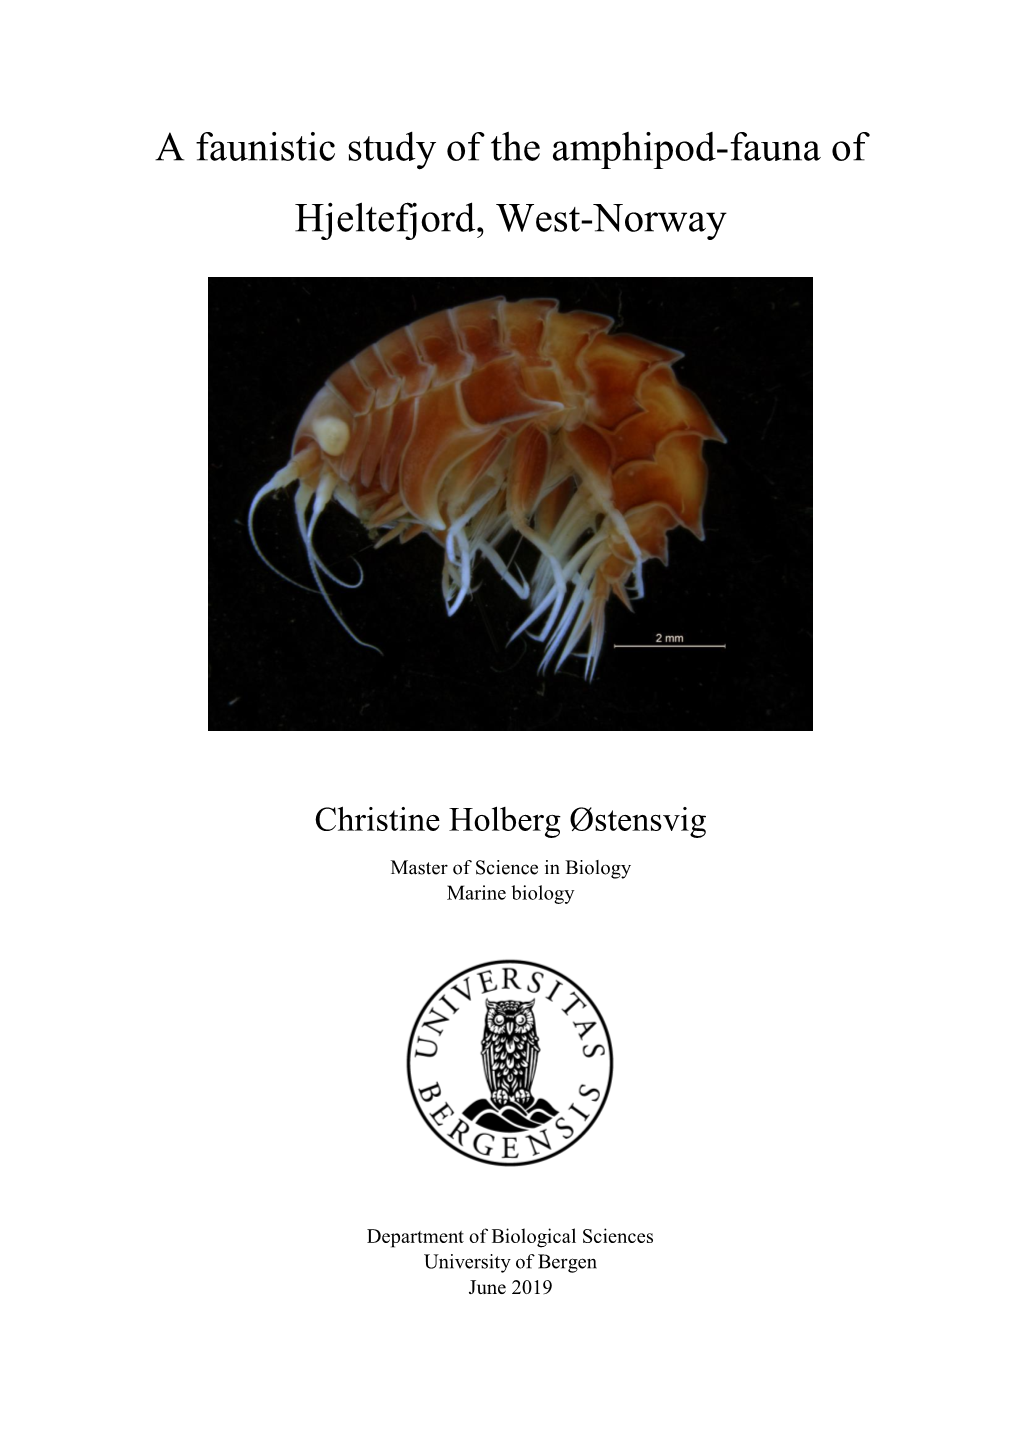 A Faunistic Study of the Amphipod-Fauna of Hjeltefjord, West-Norway